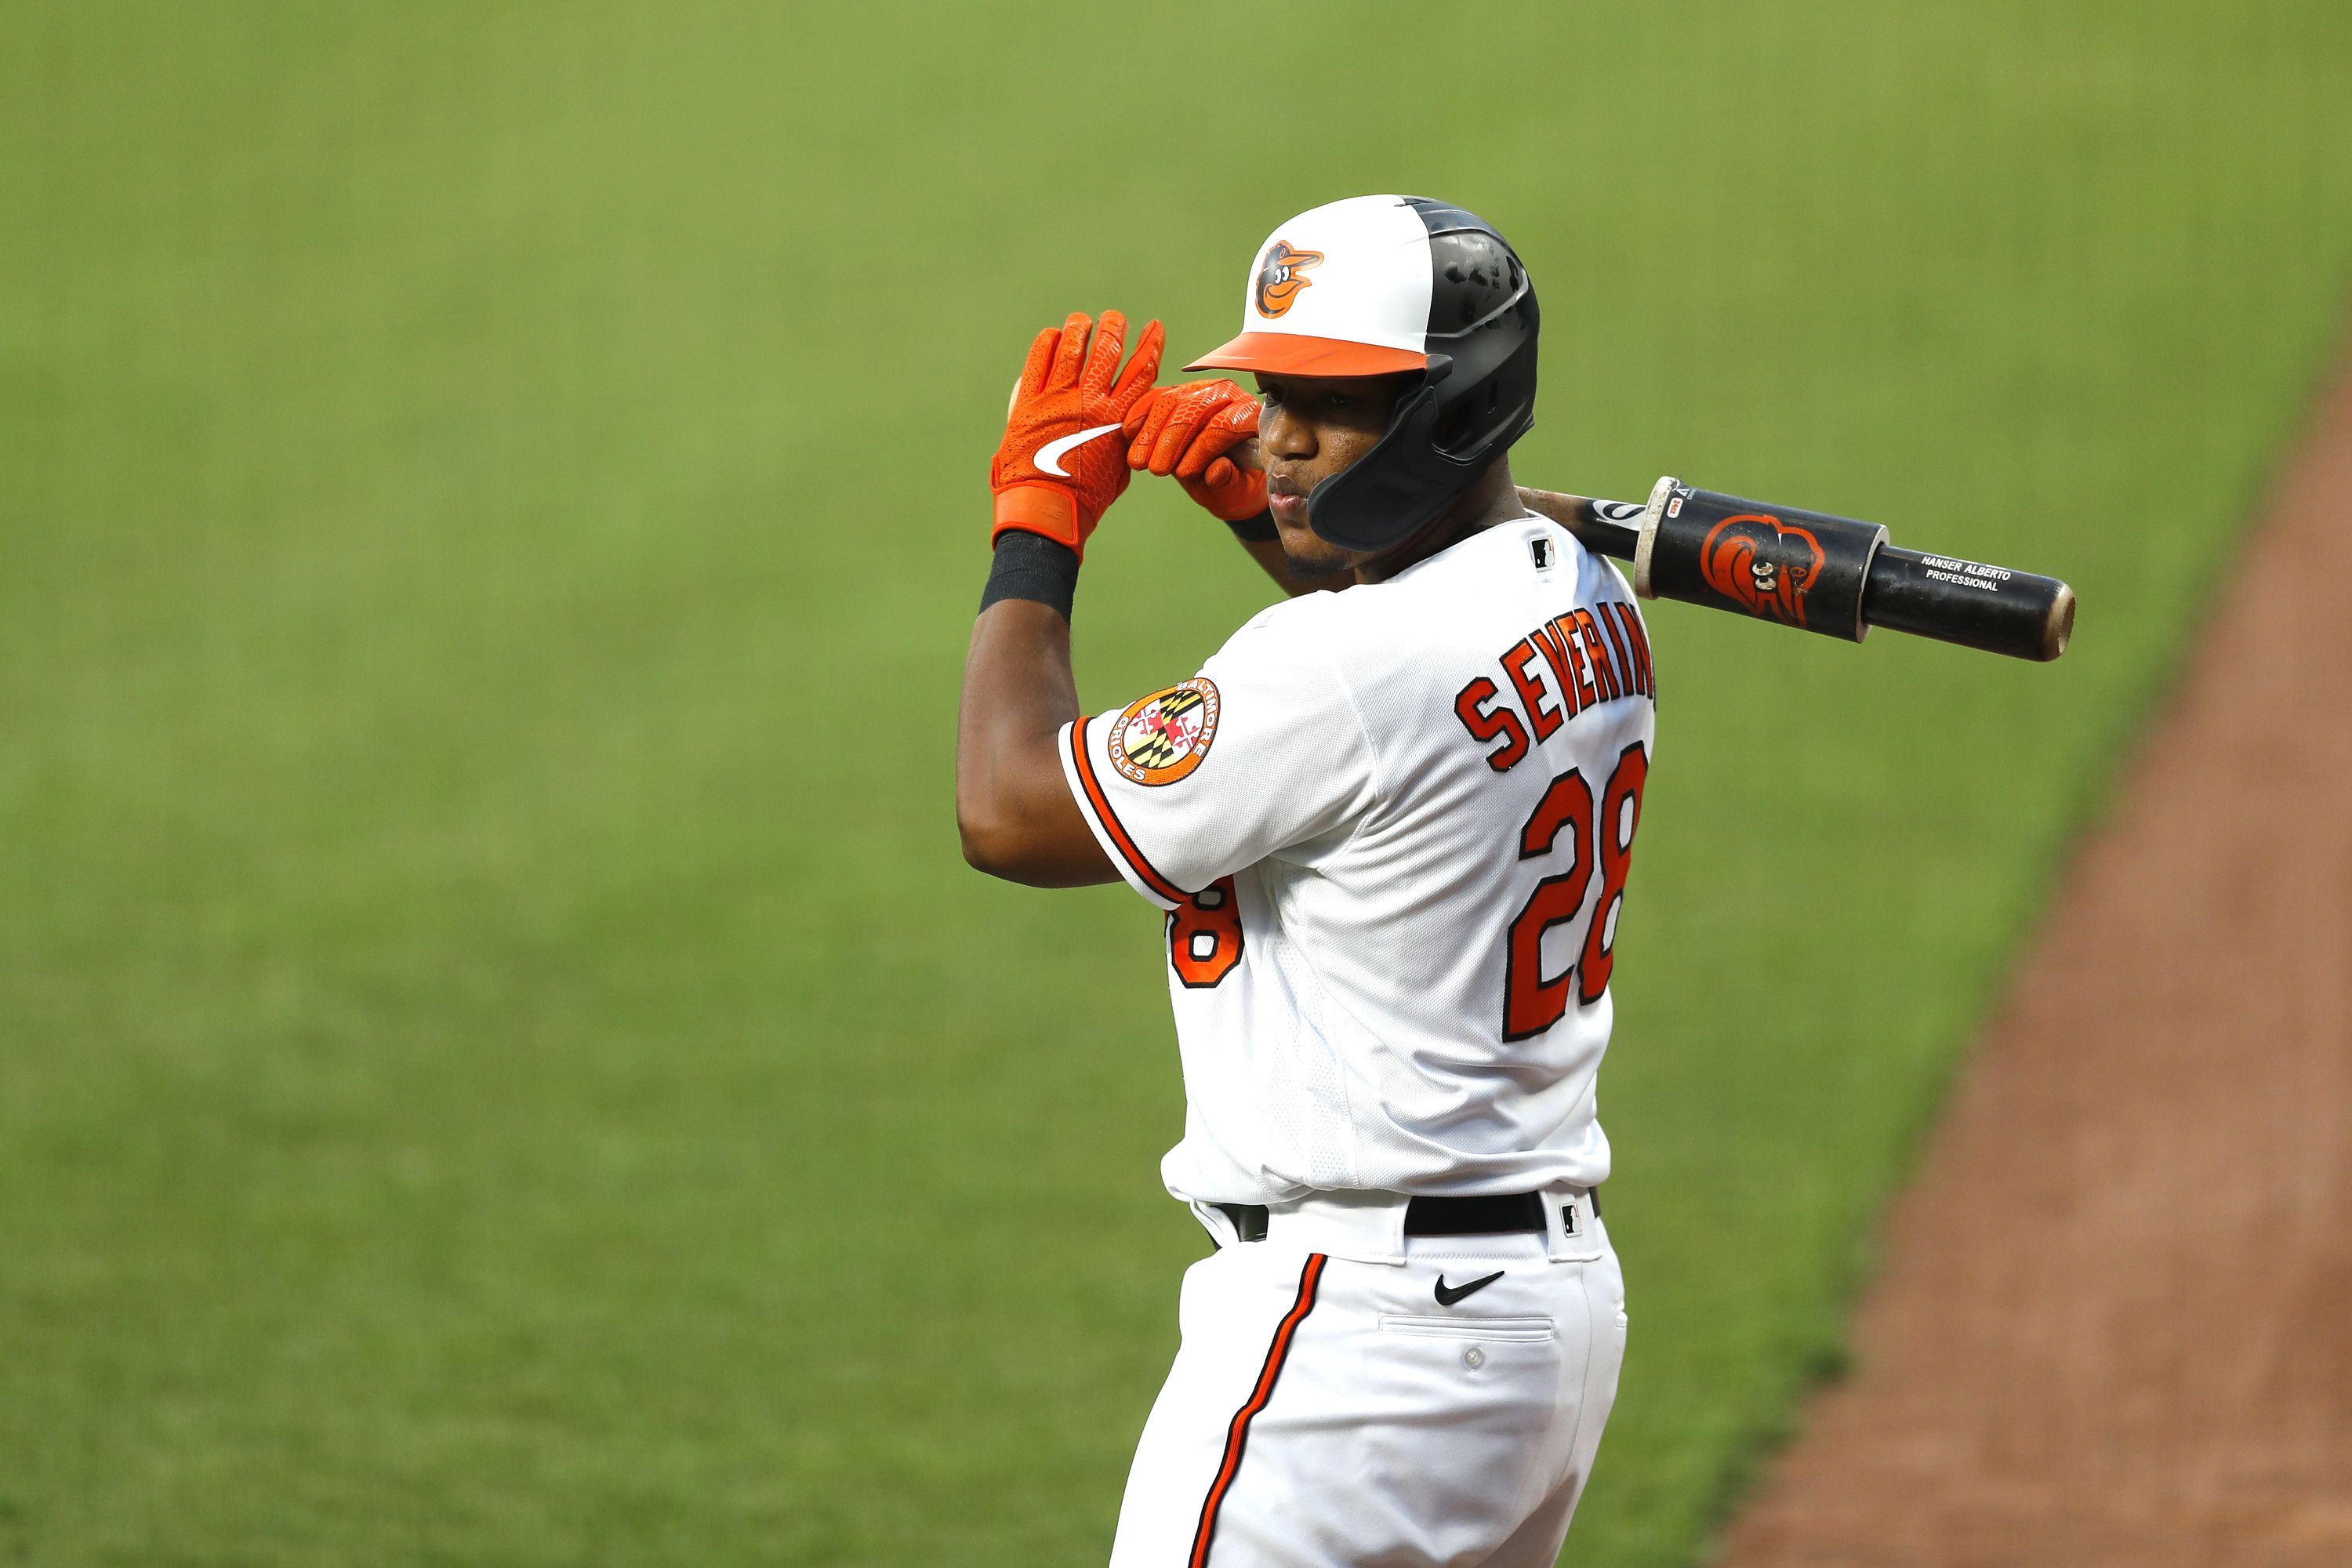 Orioles hang on for 12-11 victory over Rangers as Pedro Severino